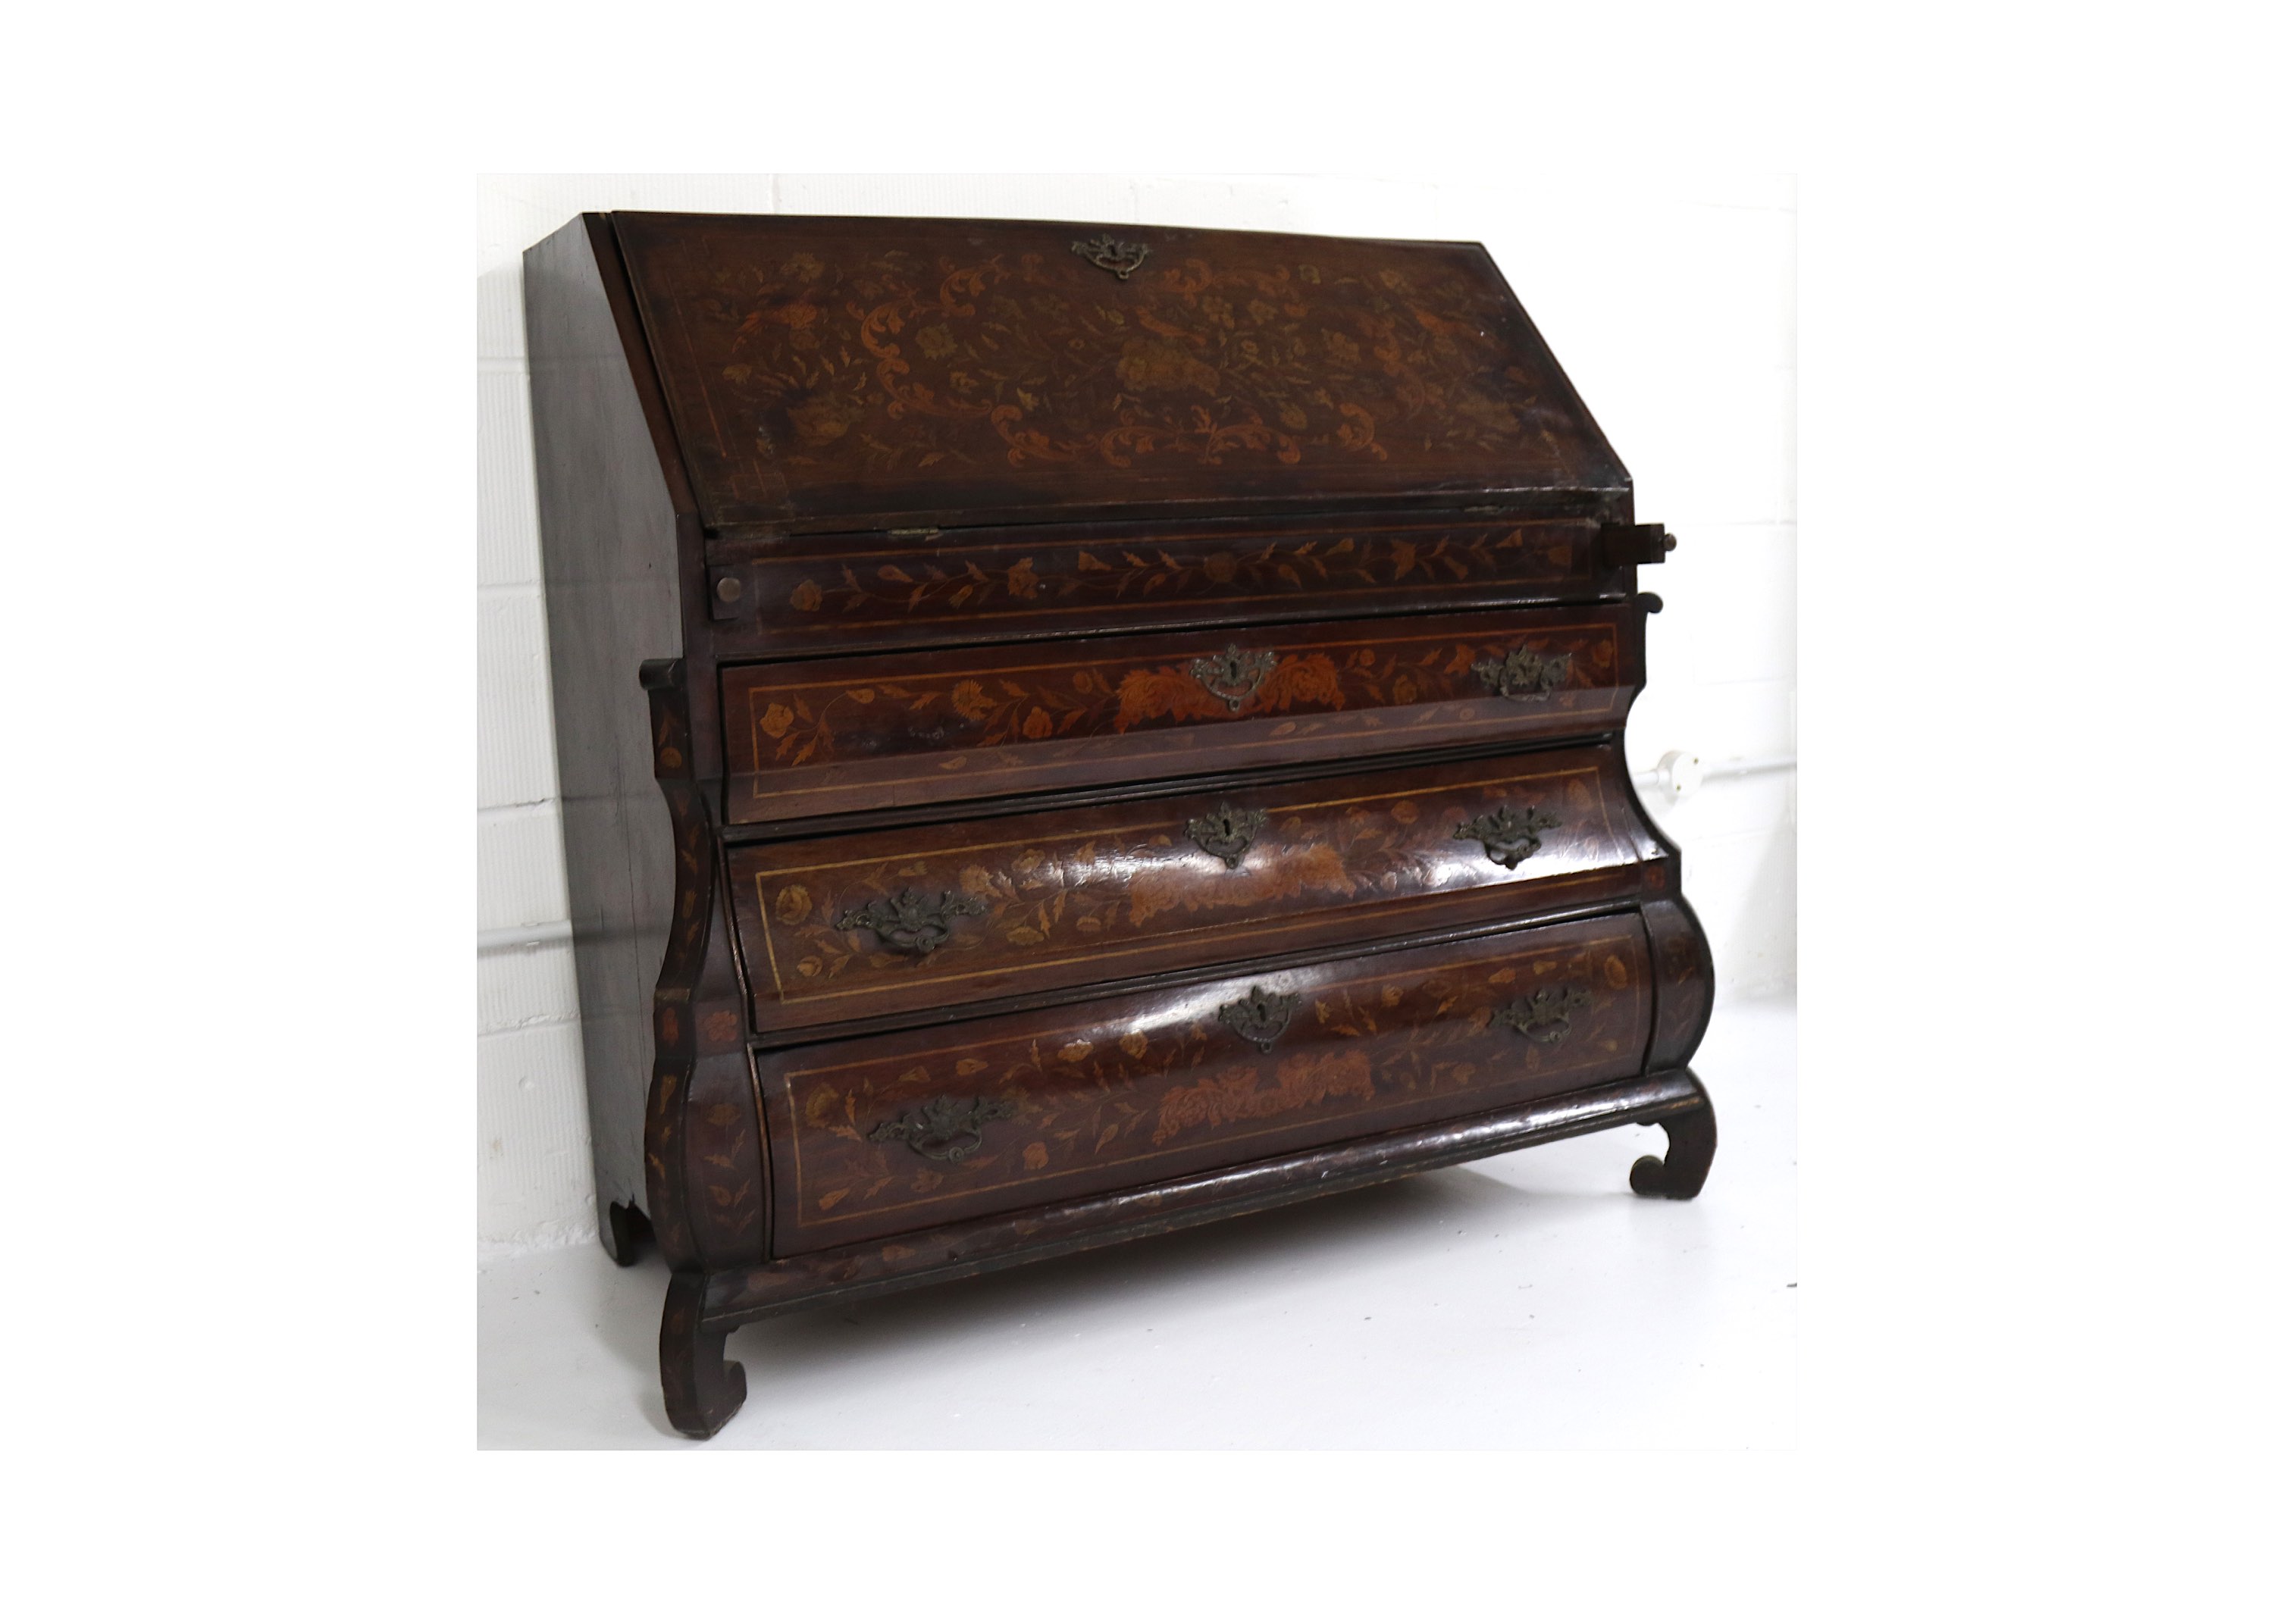 An early 19th Century Dutch walnut and floral marquetry inlaid bombe bureau, the stepped interior - Image 3 of 3